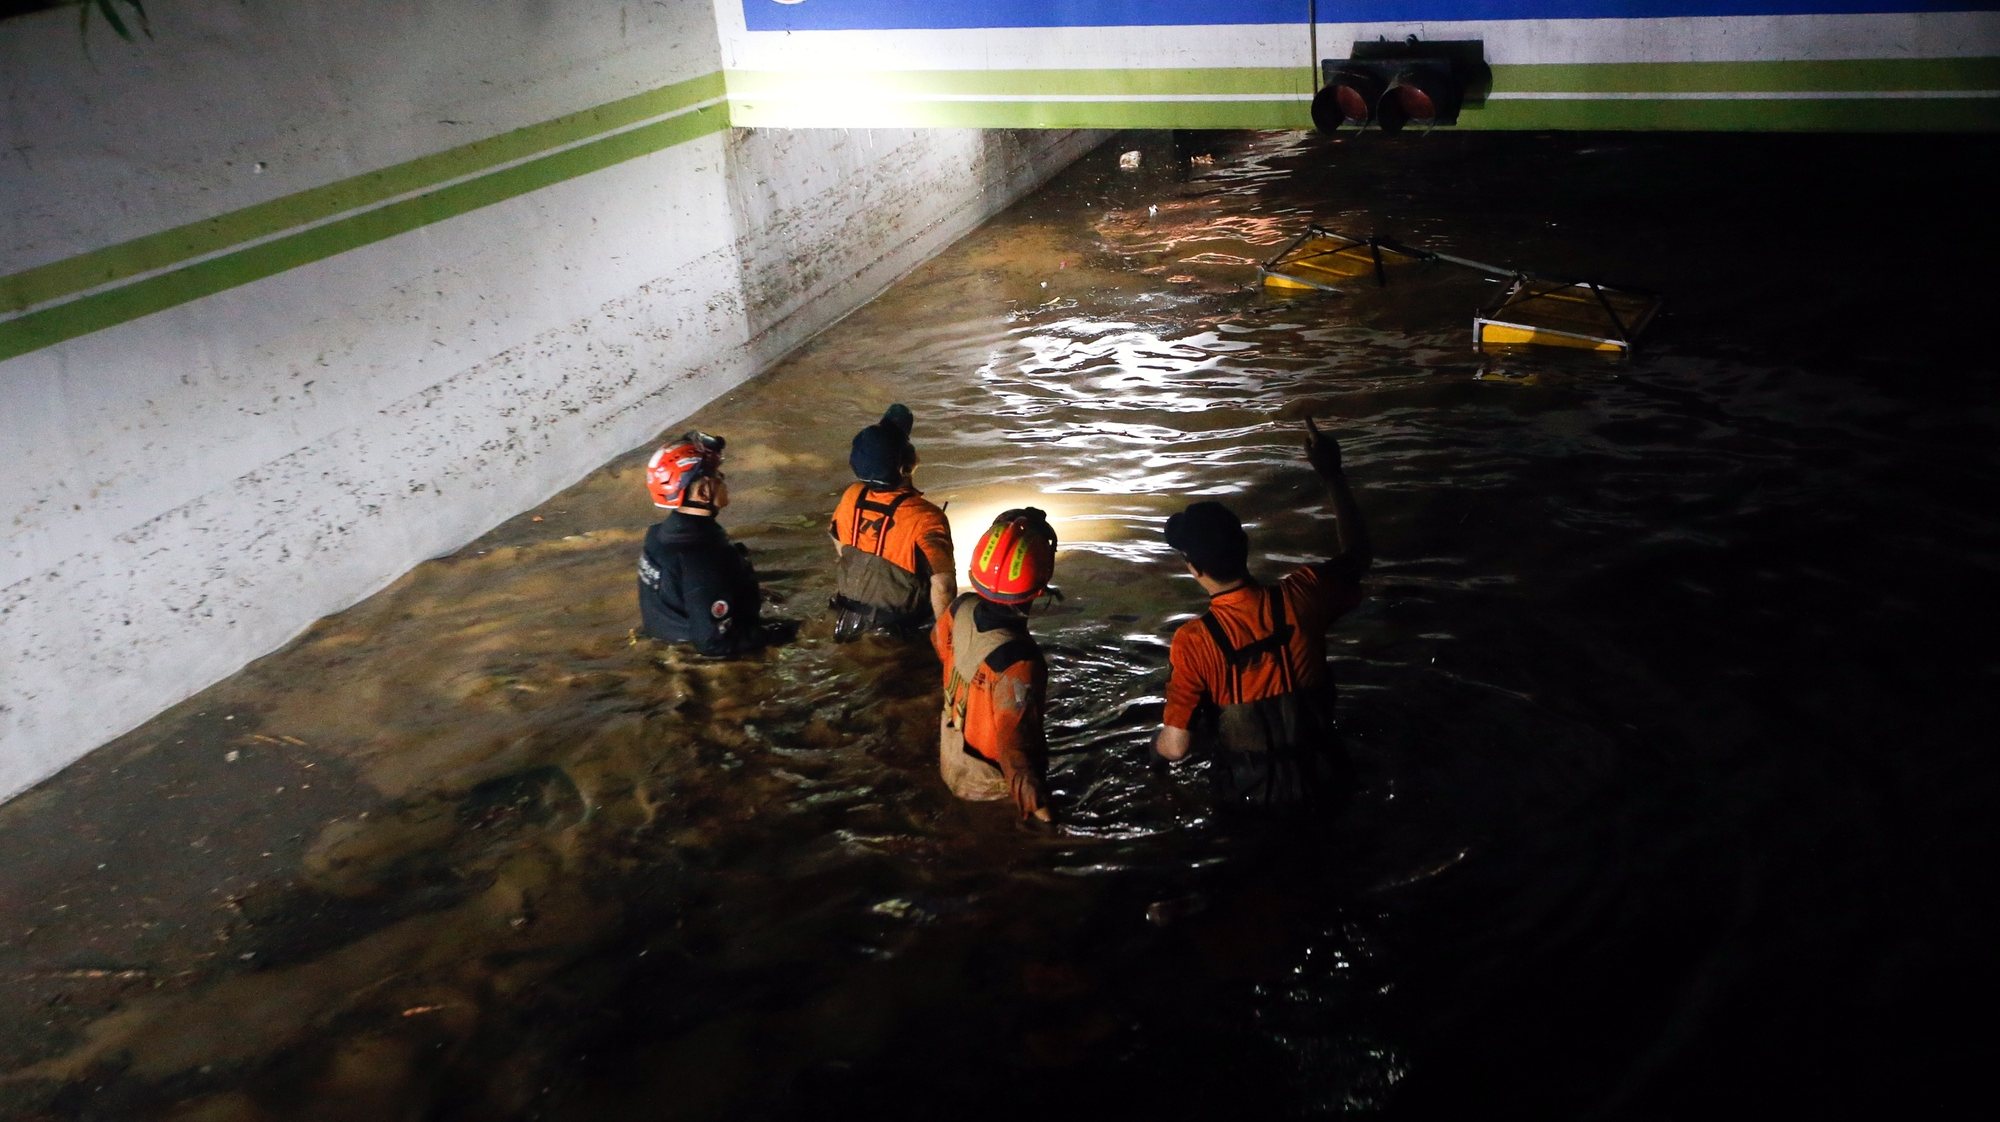 epa10164678 Firefighters and military officials are searching in an underground parking lot of an apartment in Nam-gu, Pohang-si, Gyeongsangbuk-do, which was flooded by heavy rain caused by Typhoon Hinamnor in Pohang, South Korea, 07 September 2022. According to fire authorities, two people were rescued alive and three bodies found out of seven people who were reportedly missing in the incident.  EPA/KIM HEE-CHUL